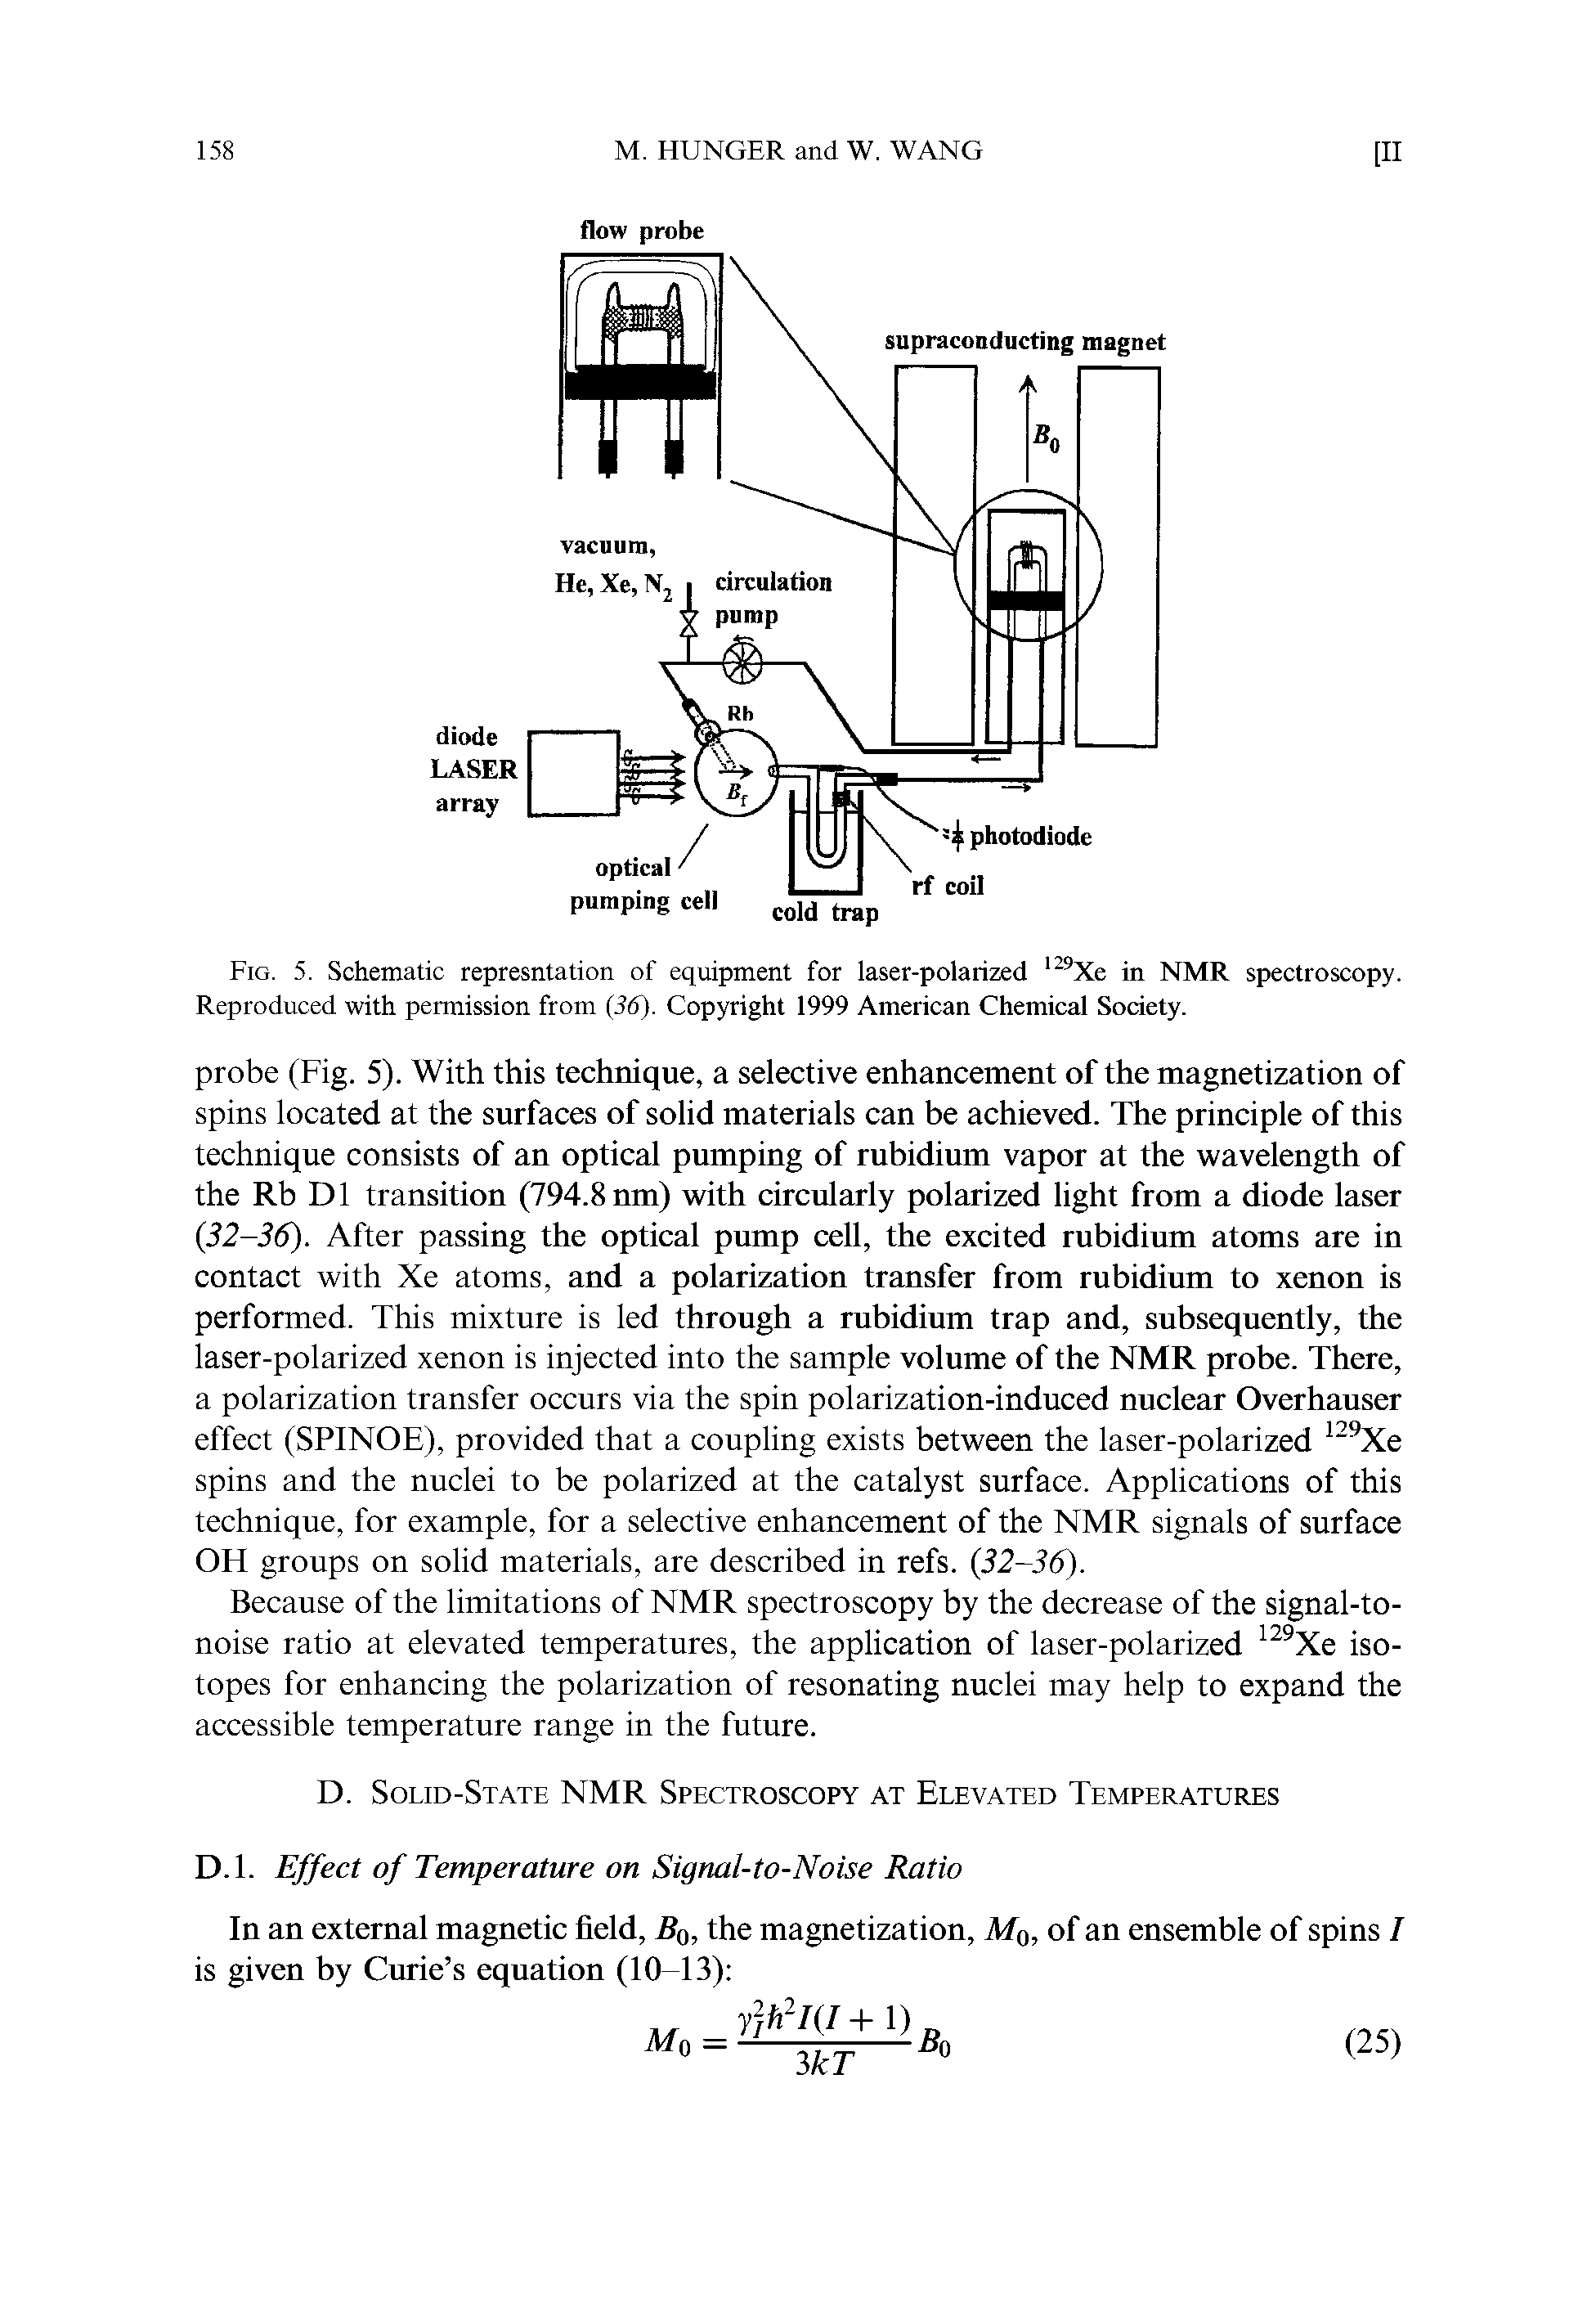 Fig. 5. Schematic represntation of equipment for laser-polarized Xe in NMR spectroscopy. Reproduced with peimission from (J6). Copyright 1999 American Chemical Society.